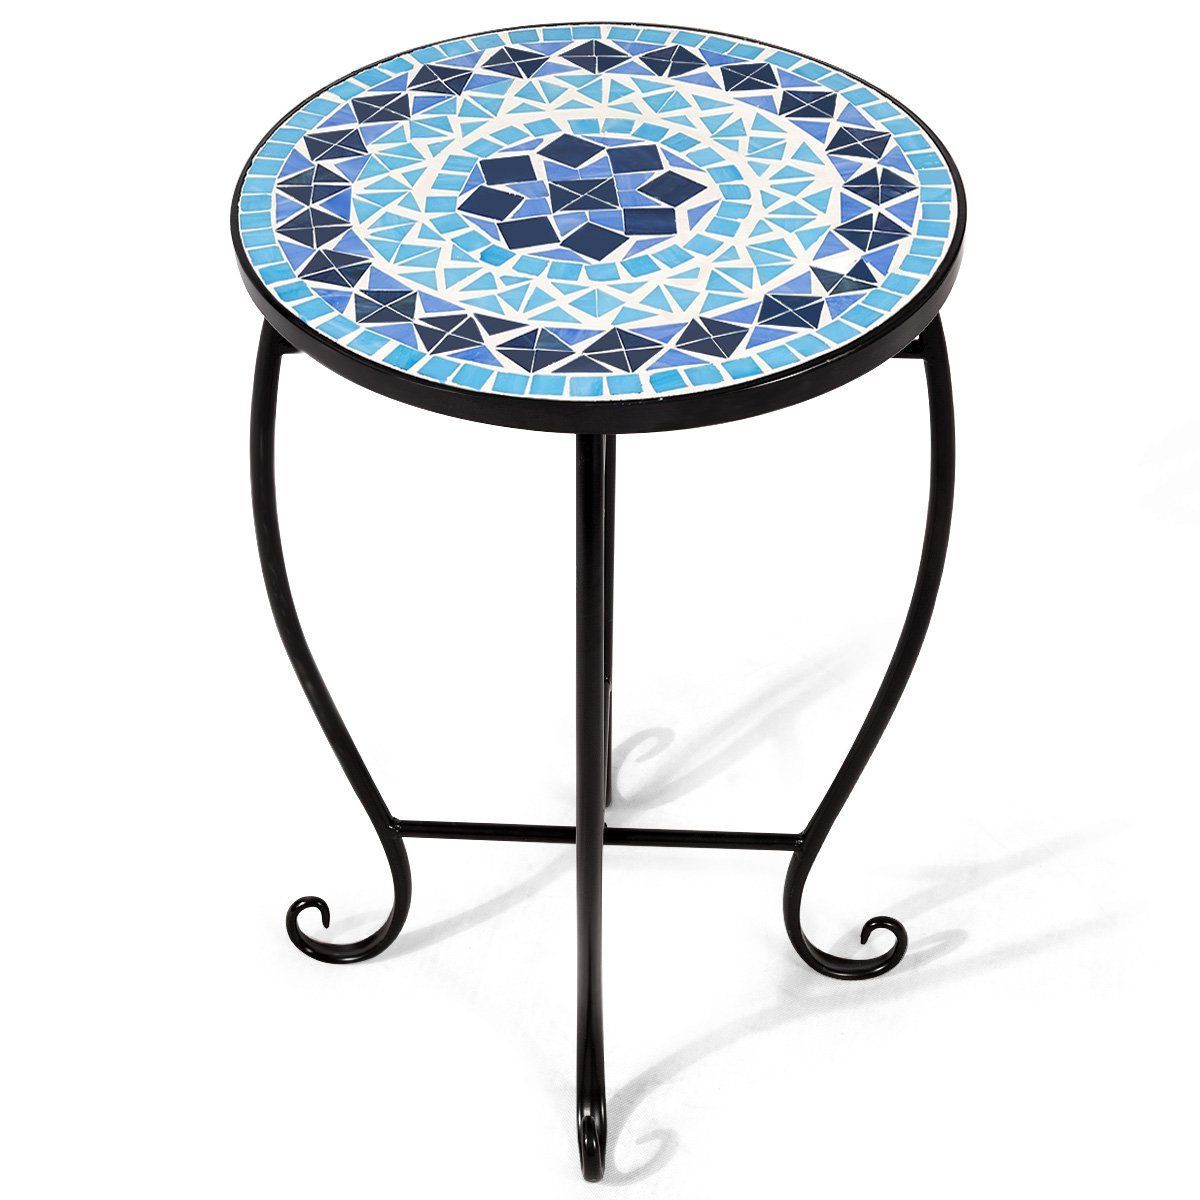 Popular Mosaic Tile Top Round Side Tables With Mosaic Round Side Table Patio (ocean Fantasy) (View 2 of 15)